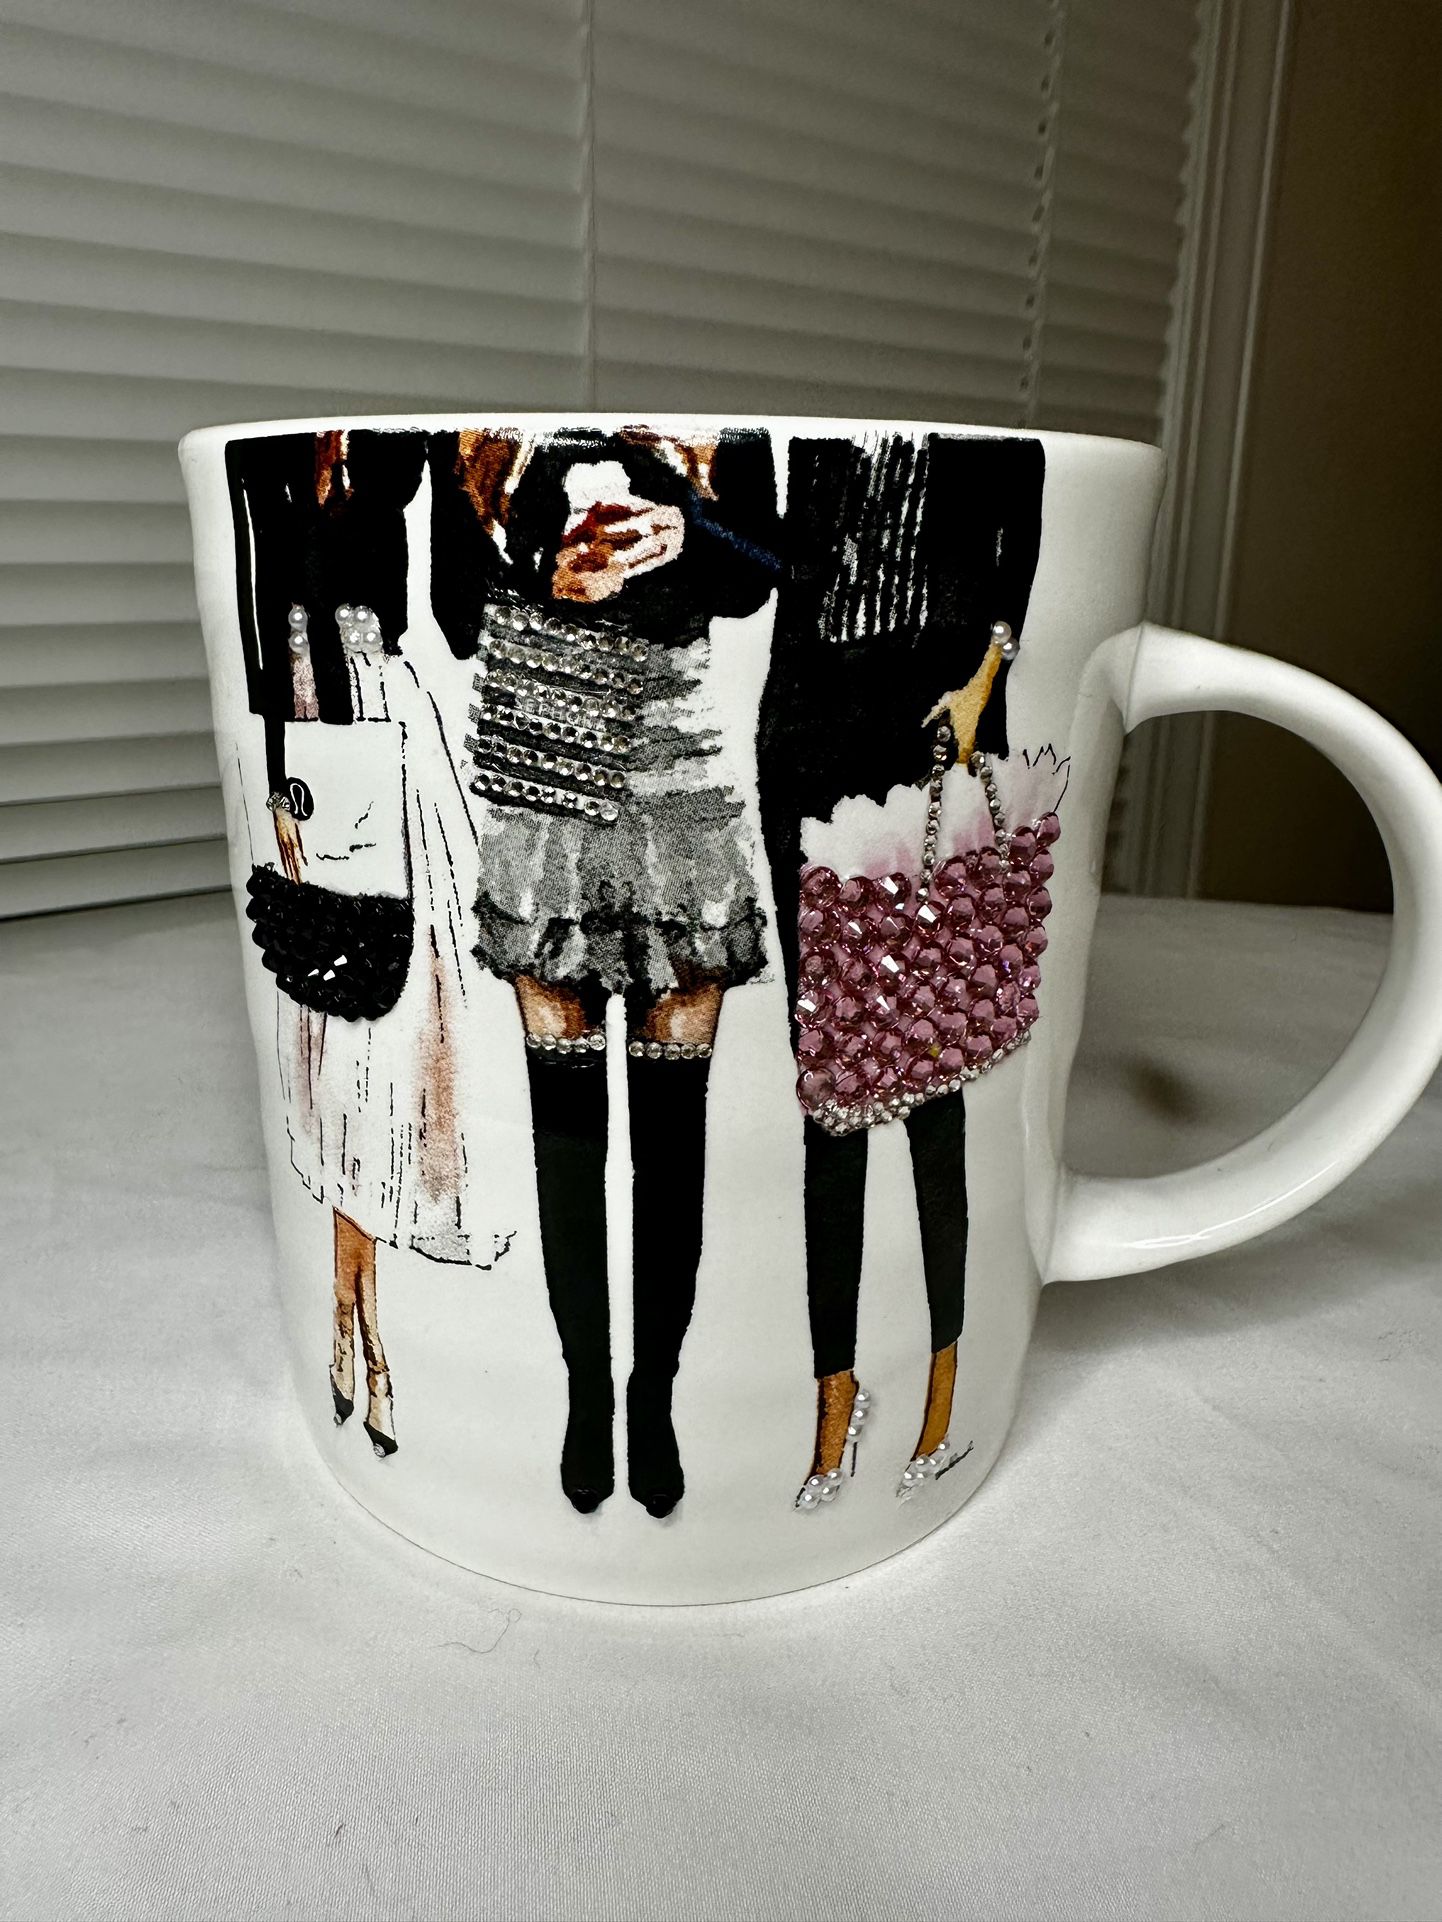 NEW Boss Babe Vibe - Bedazzled Coffee Mug Holds Approx. 18 oz.